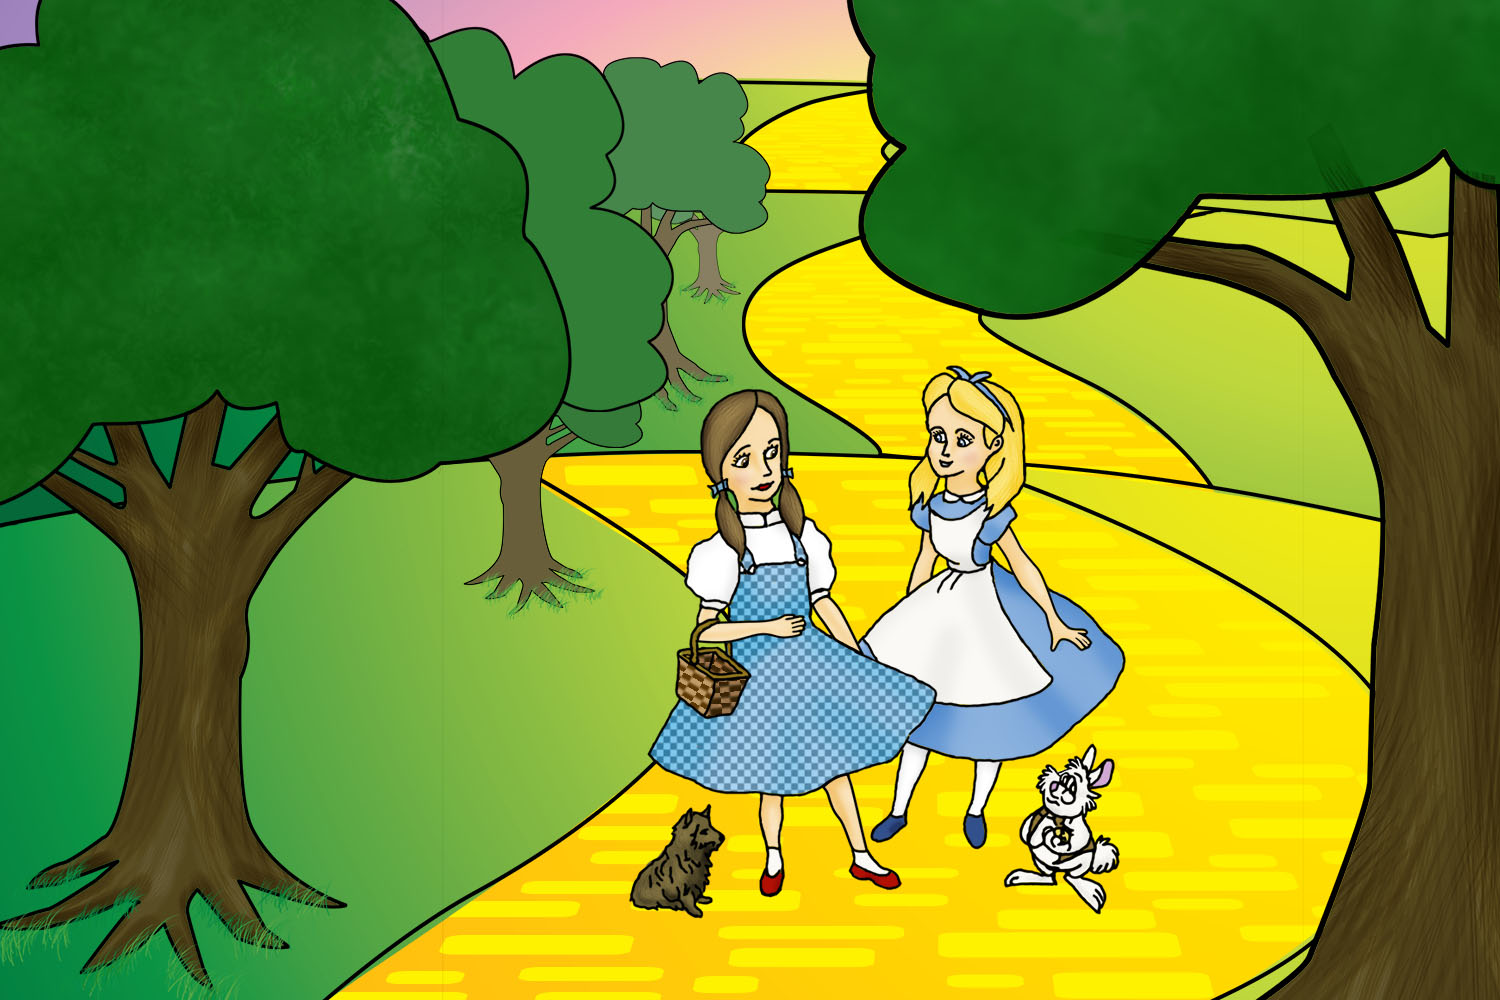 Dorothy Meets Alice or the Wizard of Wonderland